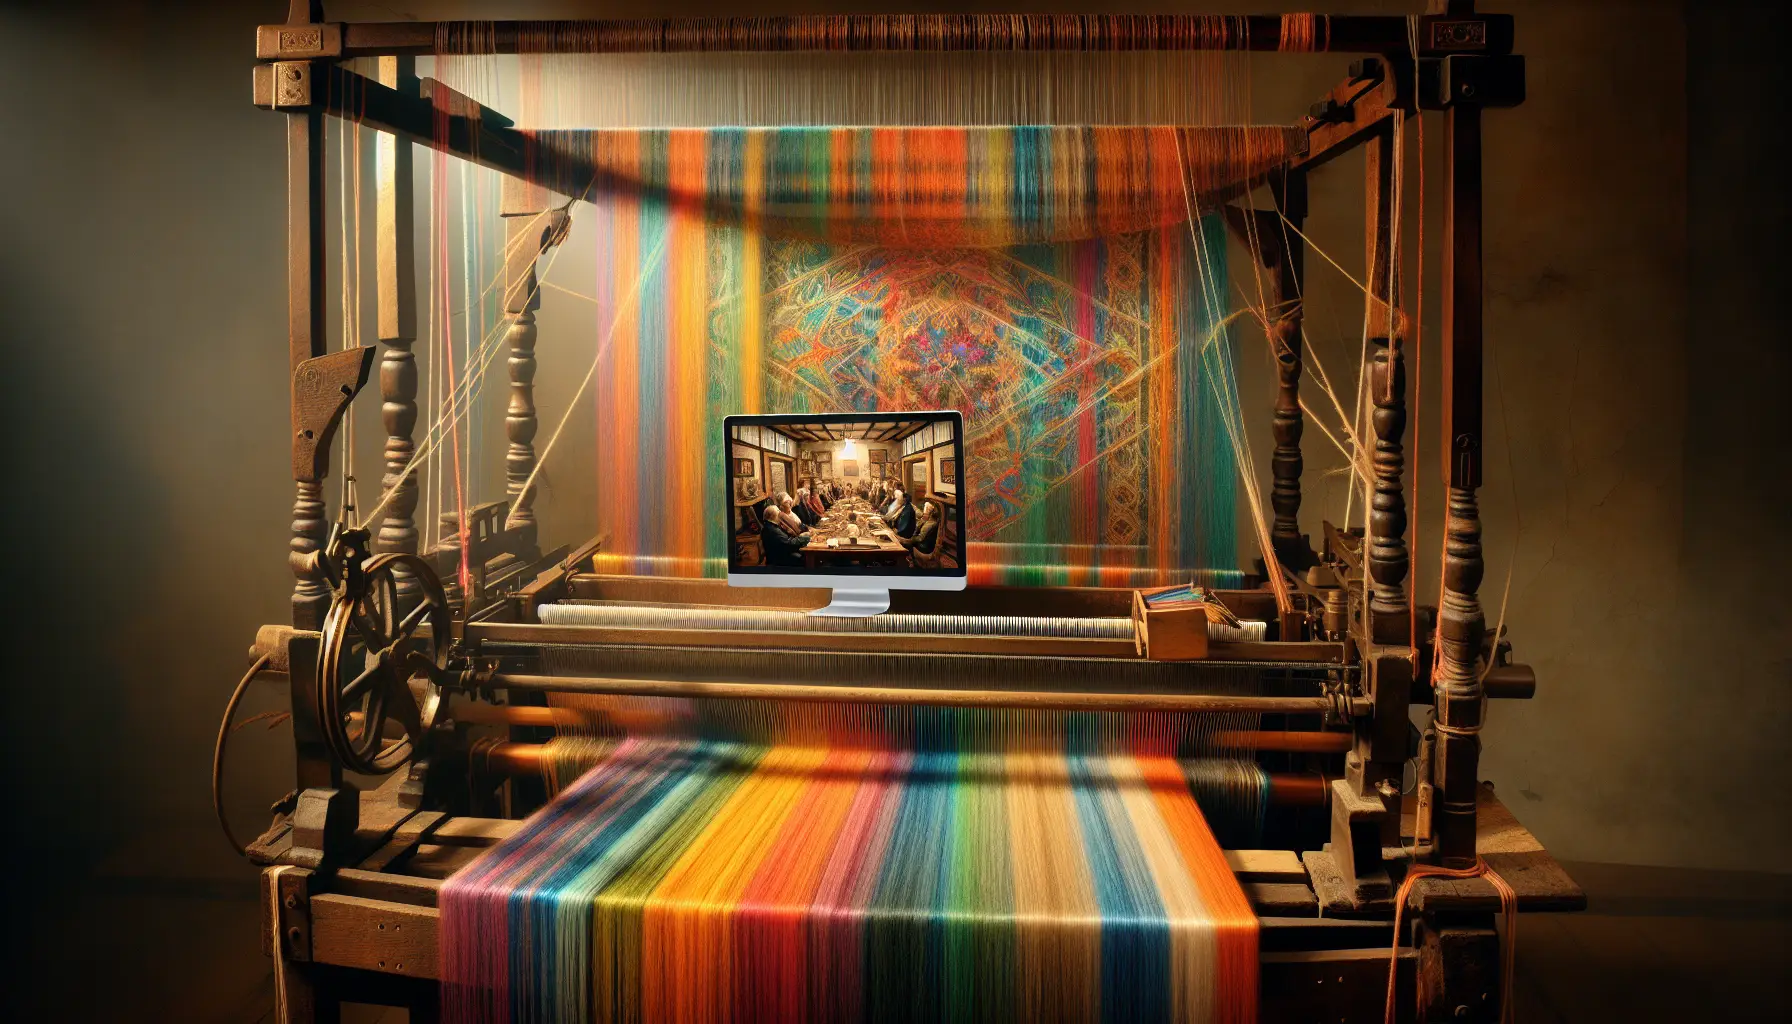 A photorealistic still life of a vintage loom with colorful threads weaving a computer monitor displaying a video conference call.